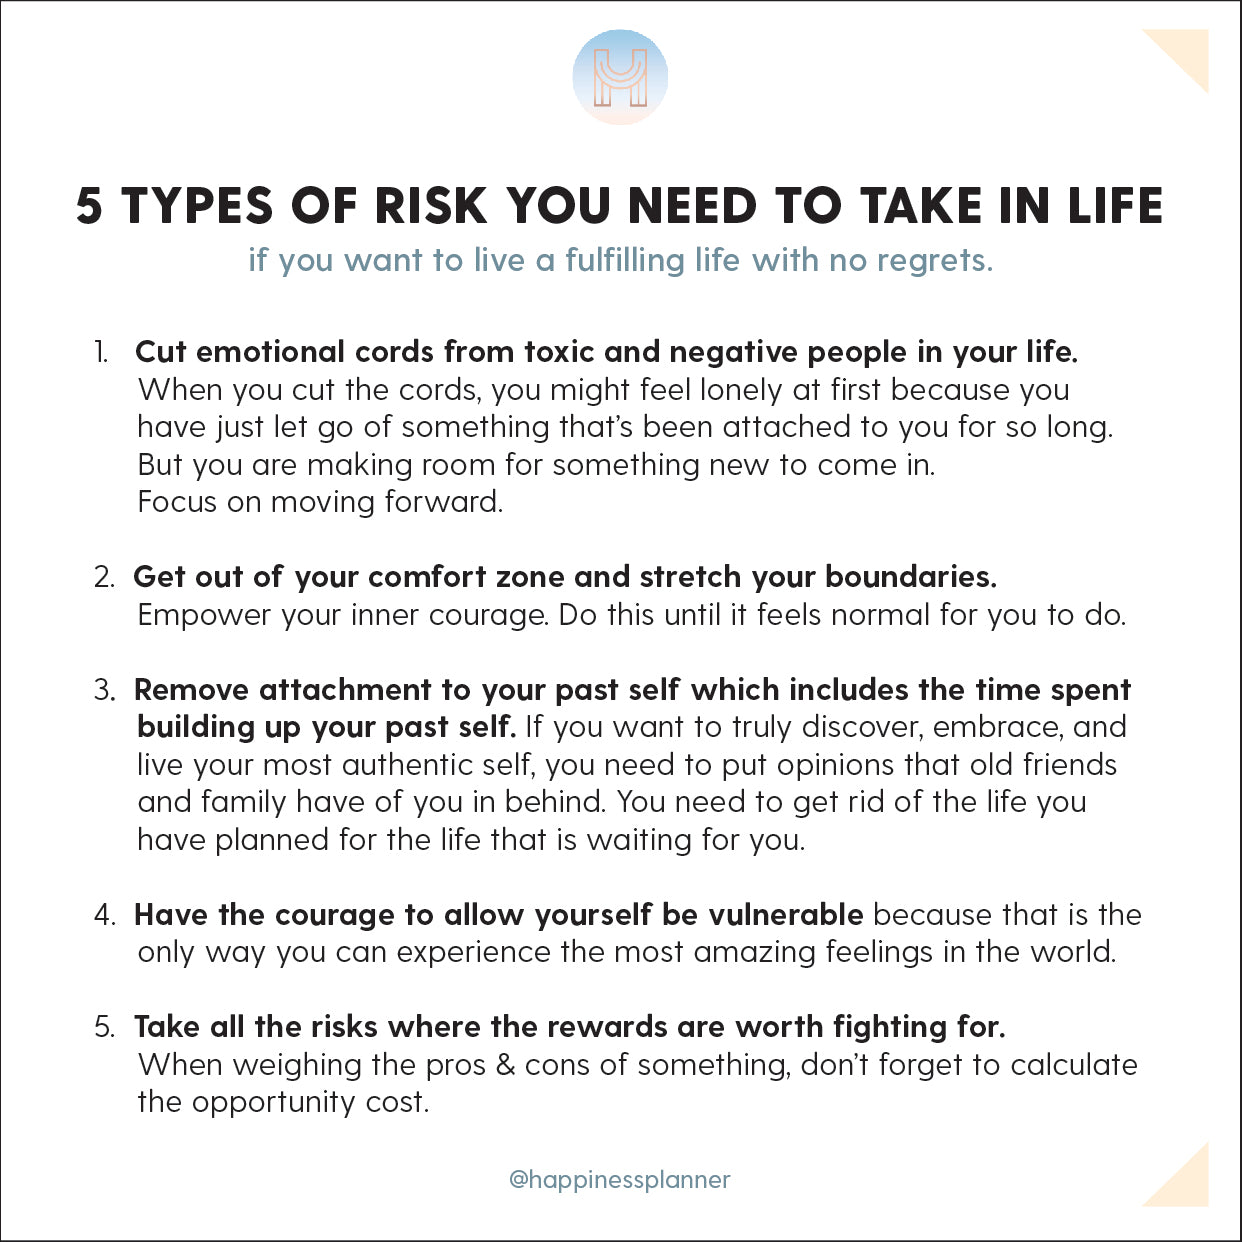 5 Types of Risk You Need To Take In Life